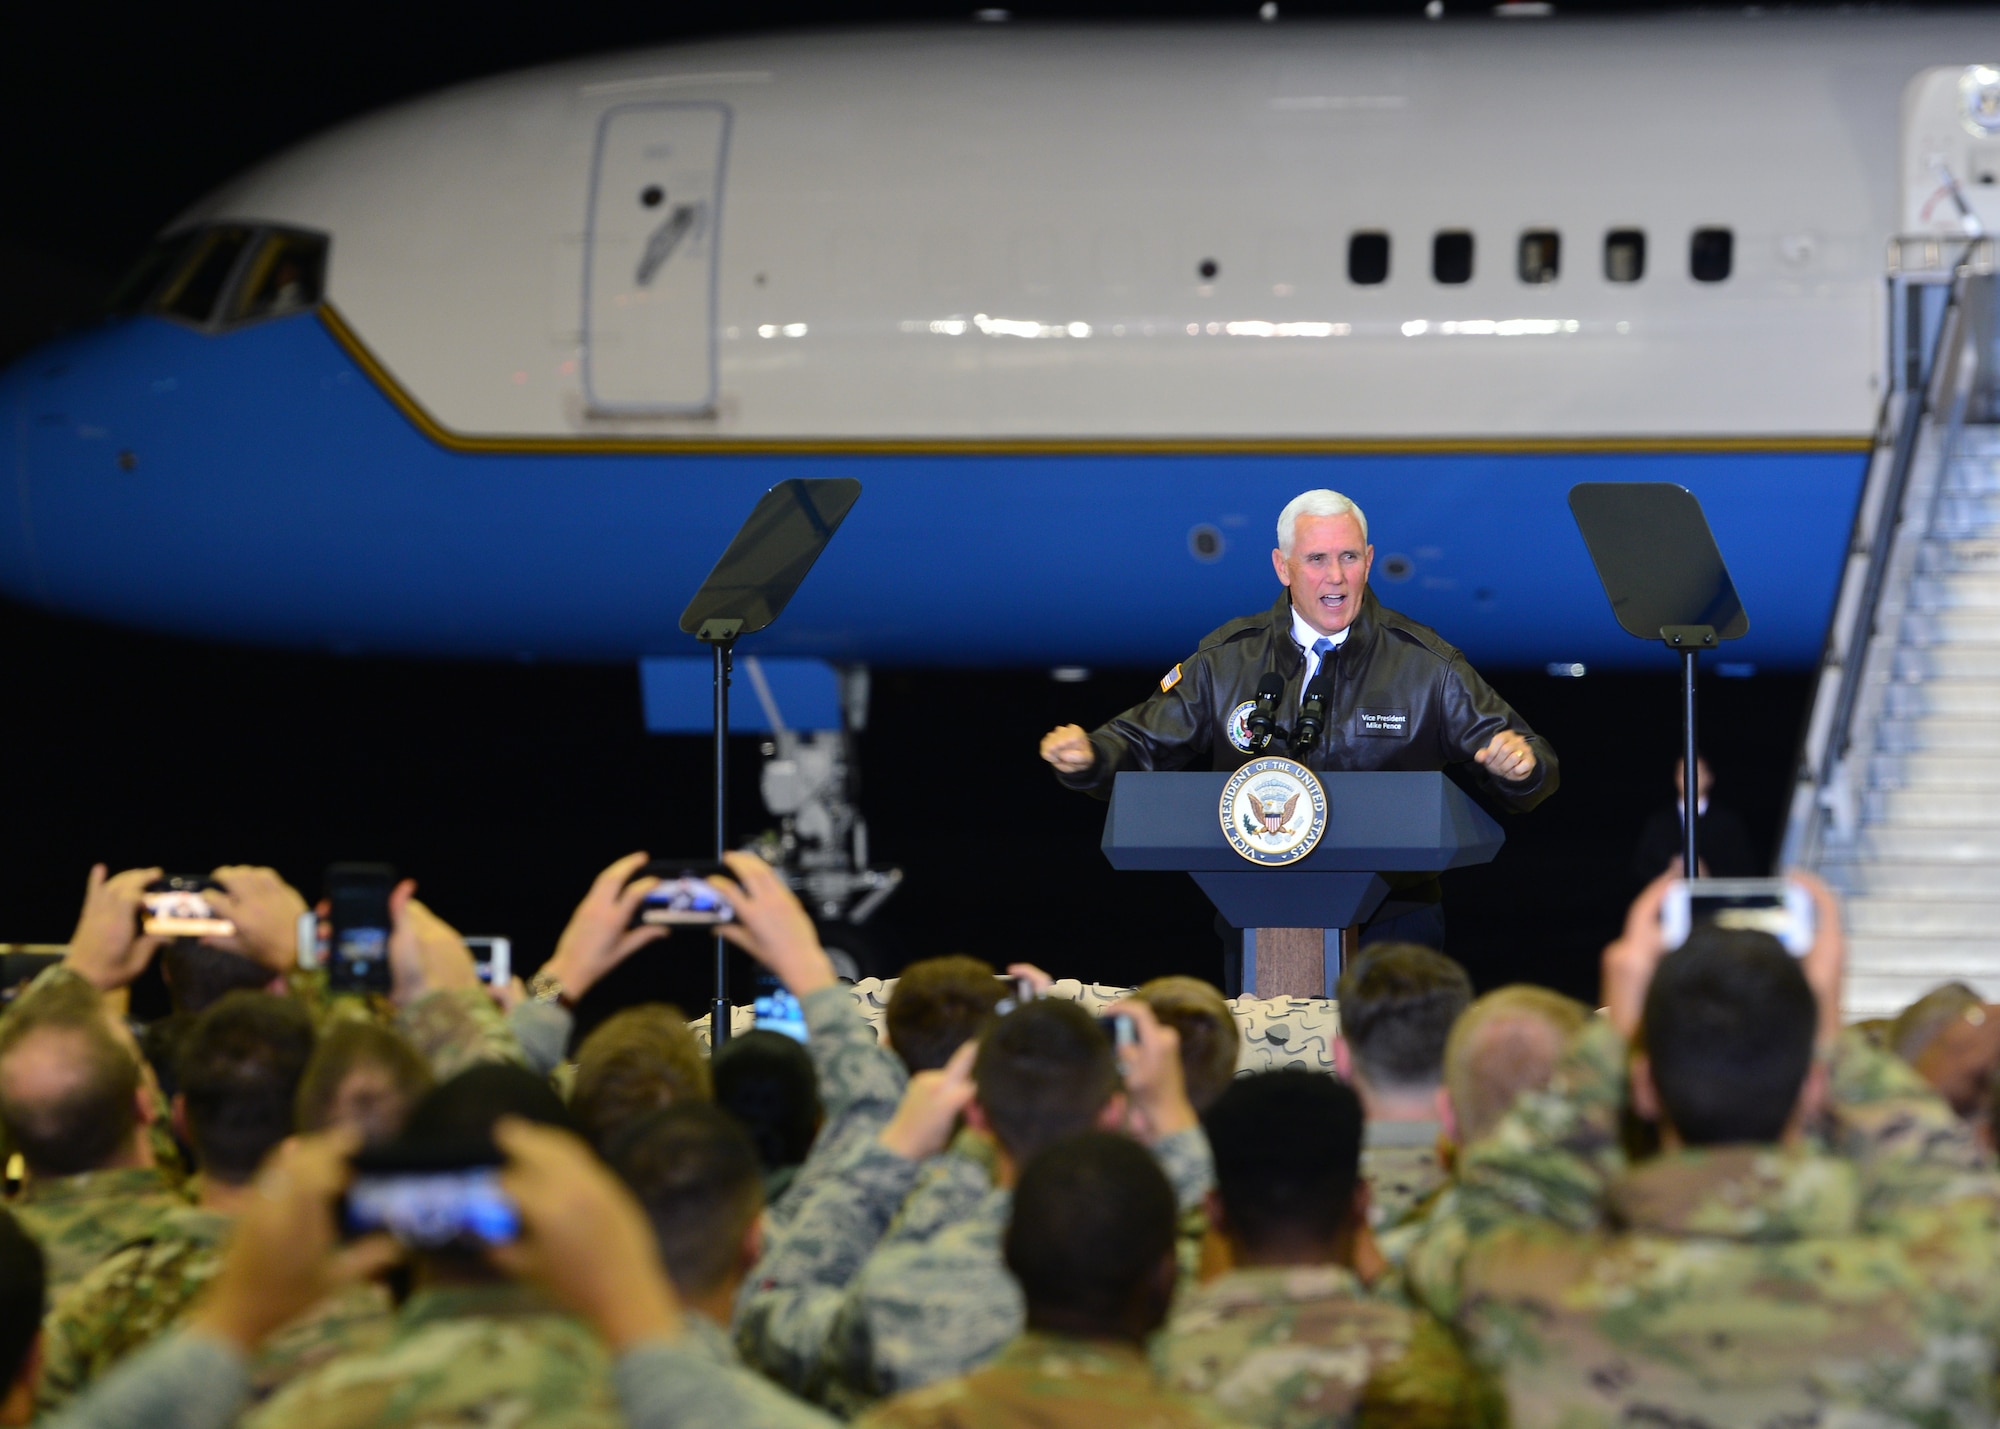 U.S. Vice President Mike Pence addresses Airmen at an all-call on Ramstein Air Base, Germany, Oct. 18, 2019. Pence spoke to Ramstein Airmen about their role in maintaining peace and security within the European theater. (U.S. Air Force photo by Staff Sgt. Jimmie D. Pike)